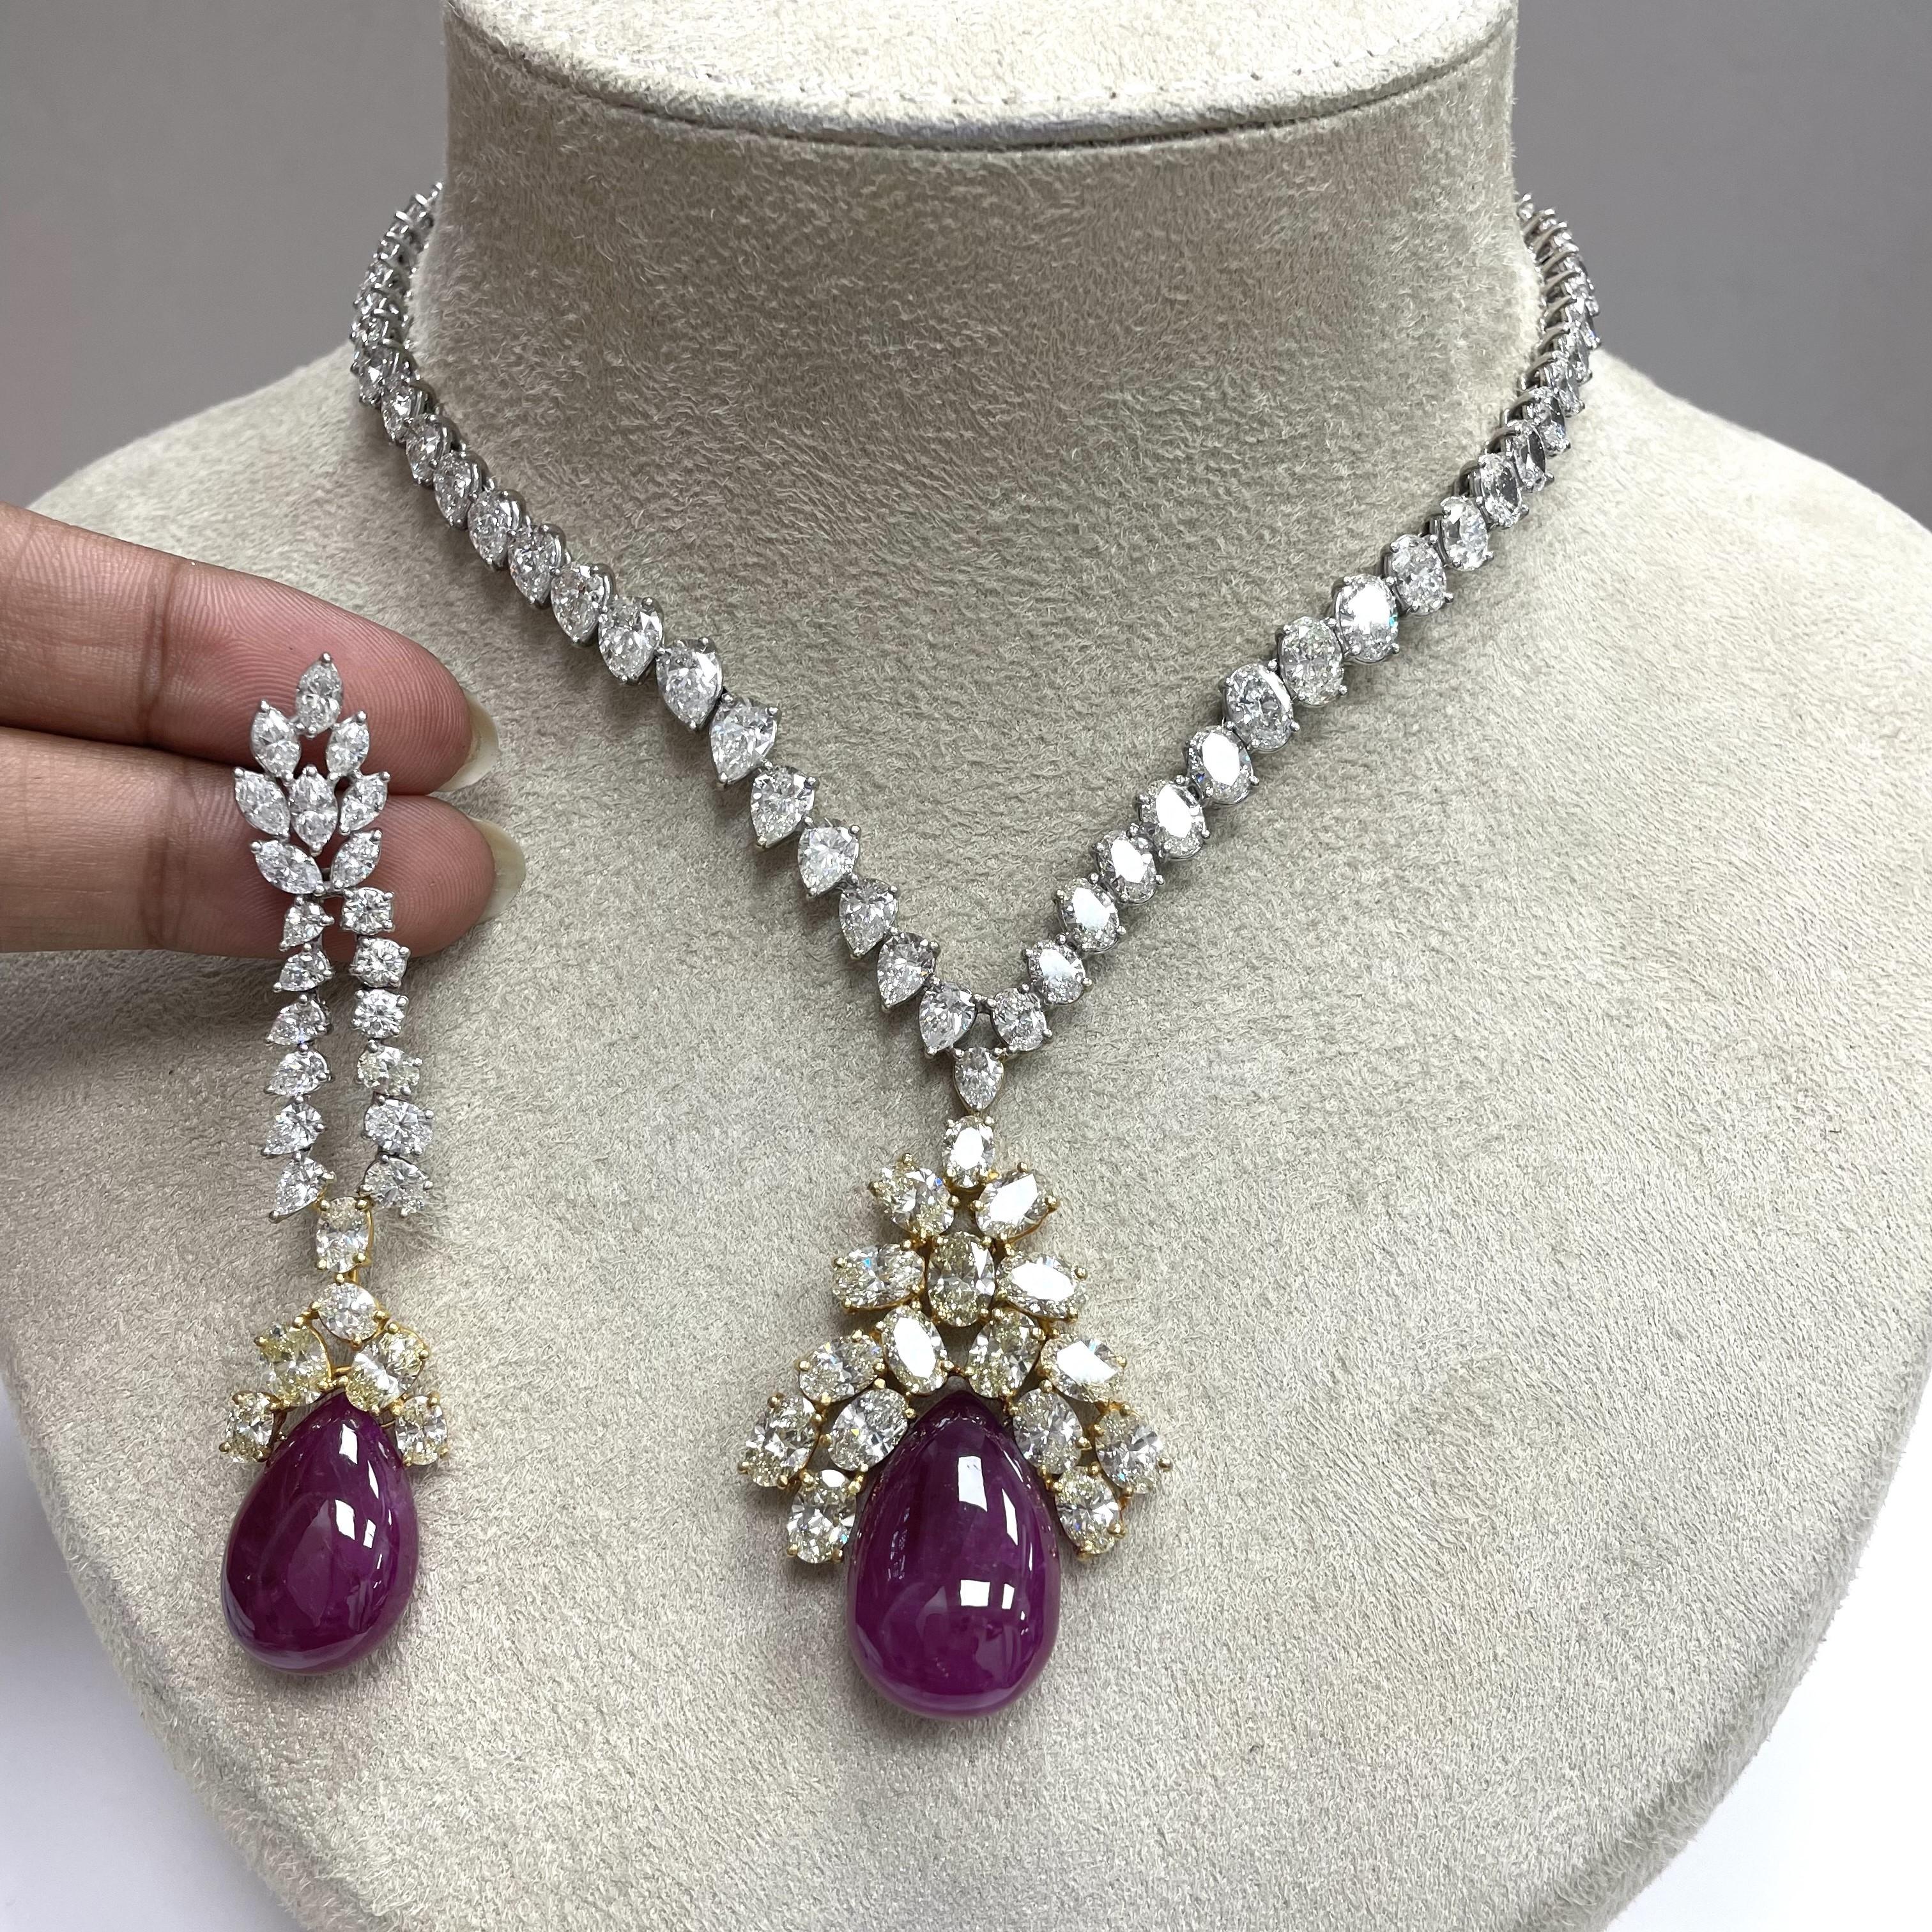 Beauvince Bloom Necklace & Earrings Suite (150.45 ct Rubies & Diamonds) in Gold For Sale 1